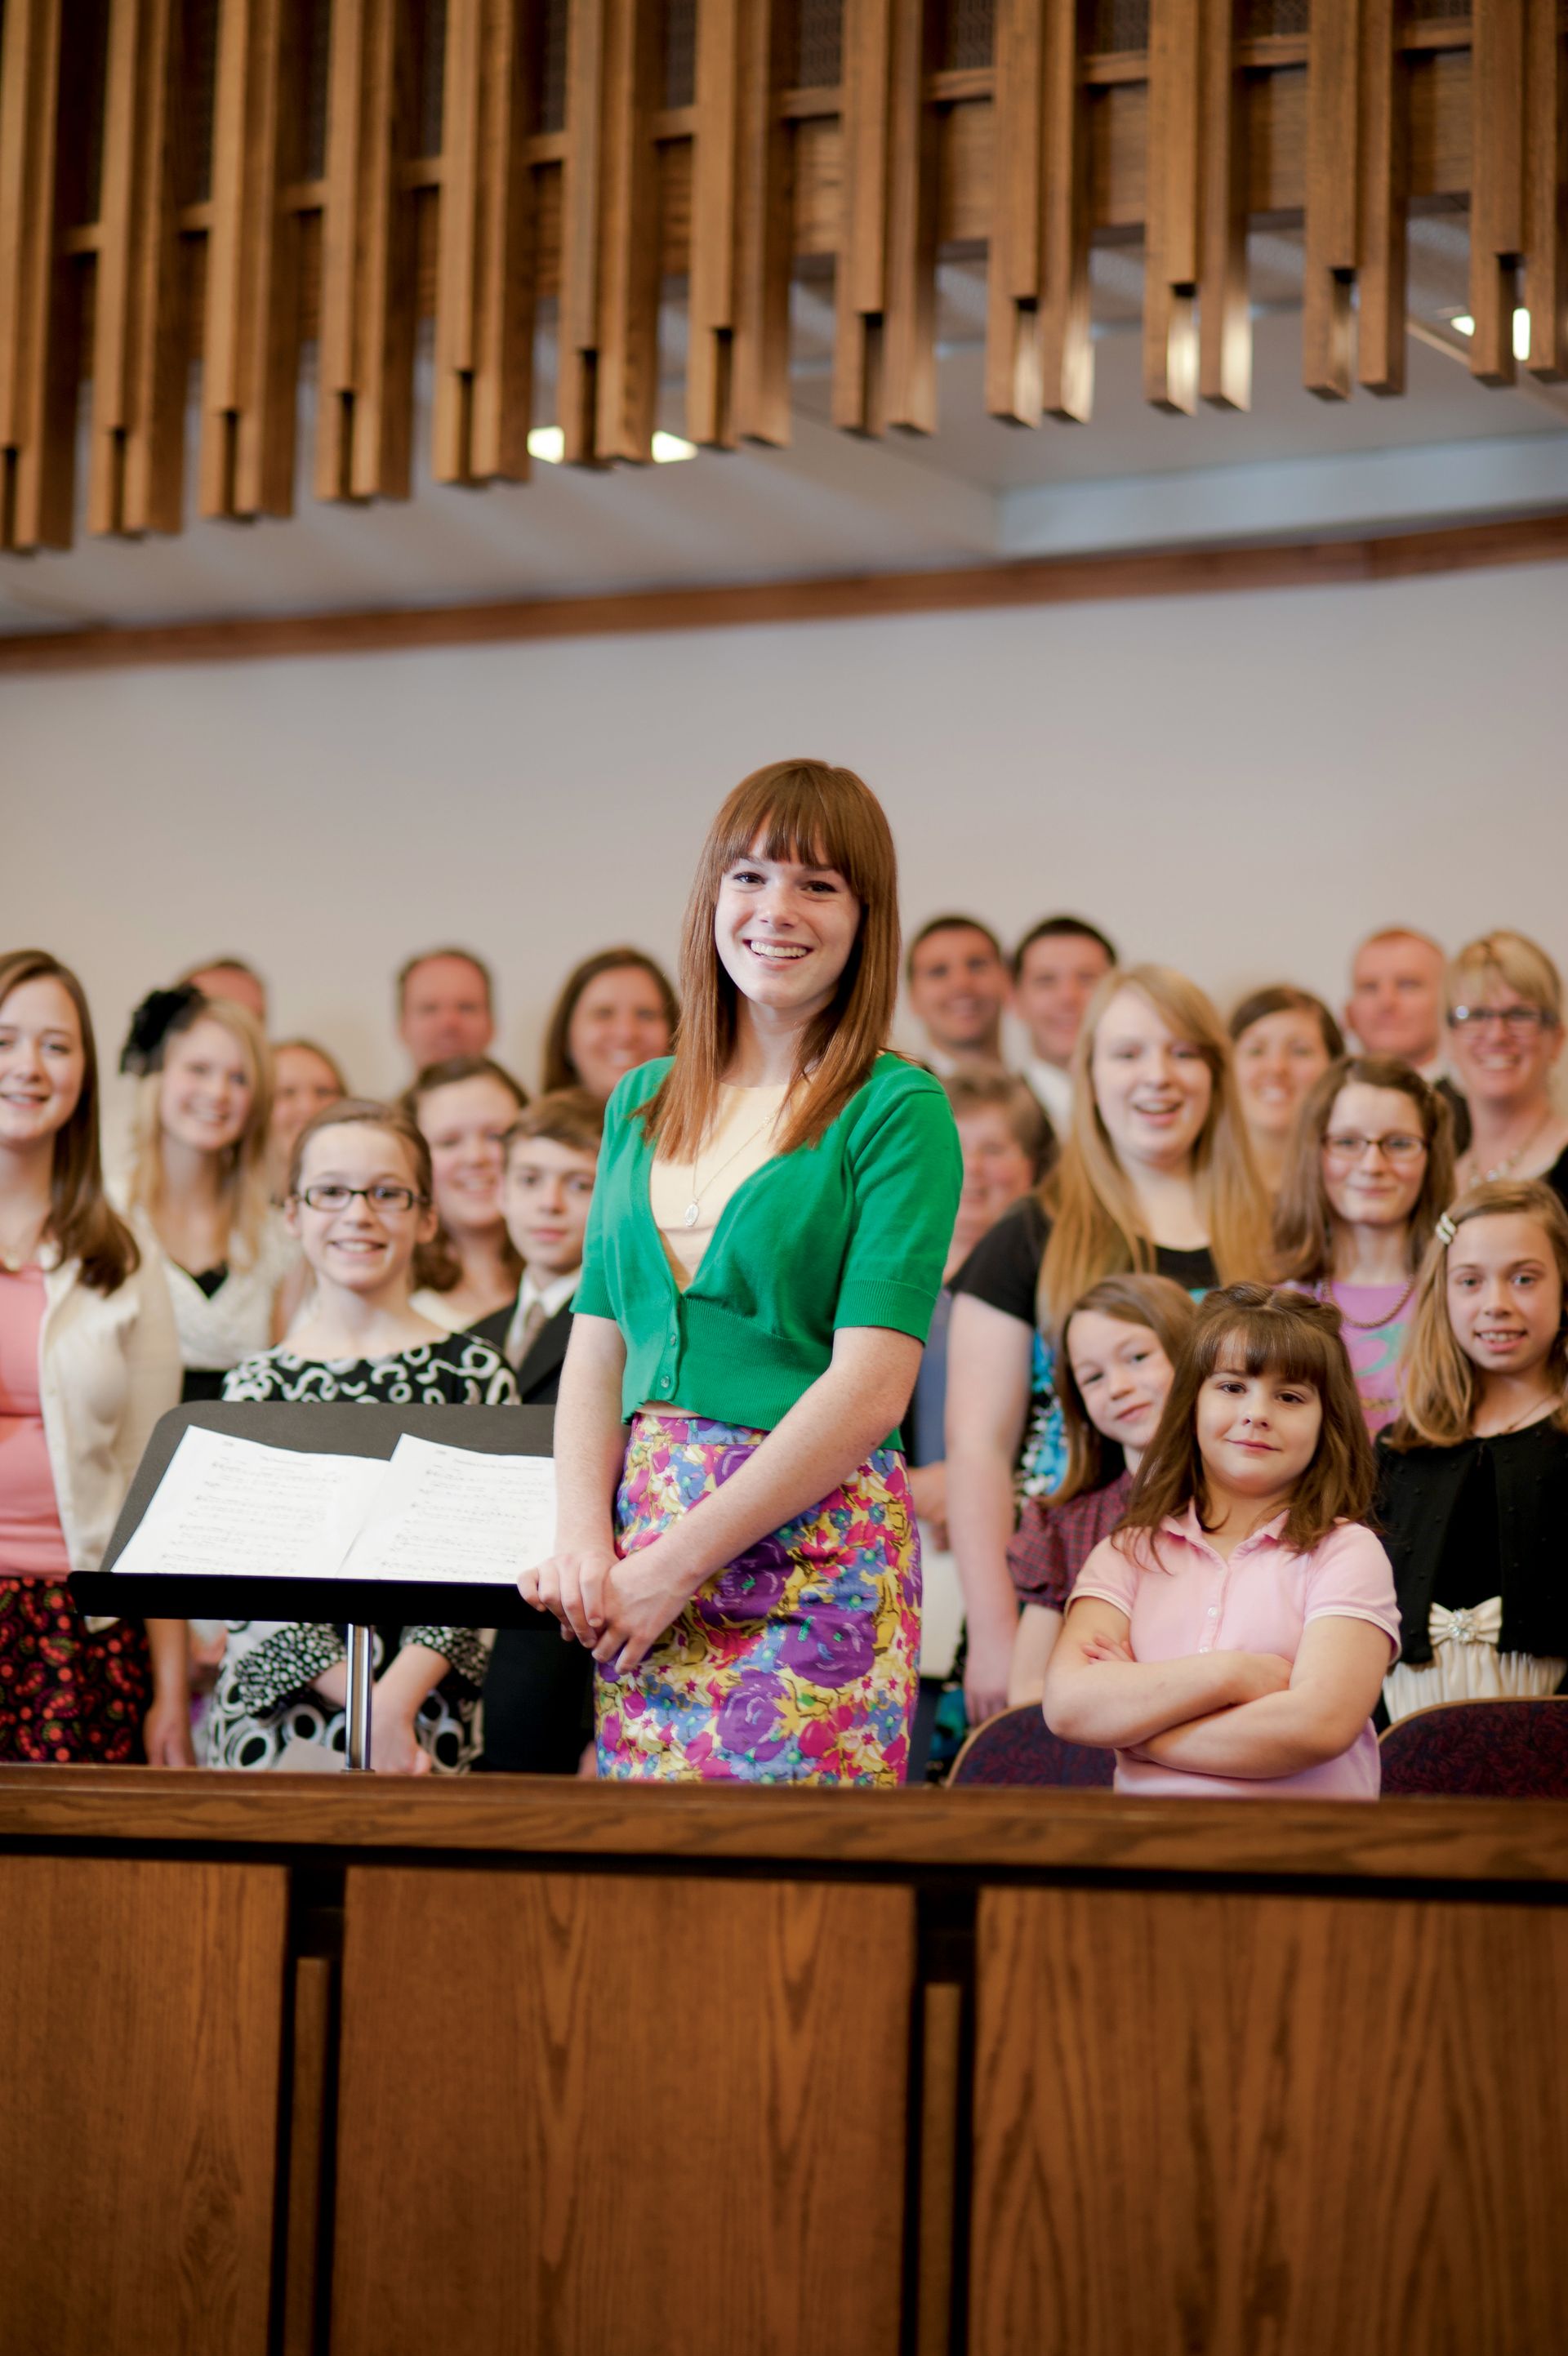 A young woman chorister stands in front of a choir of other young women.